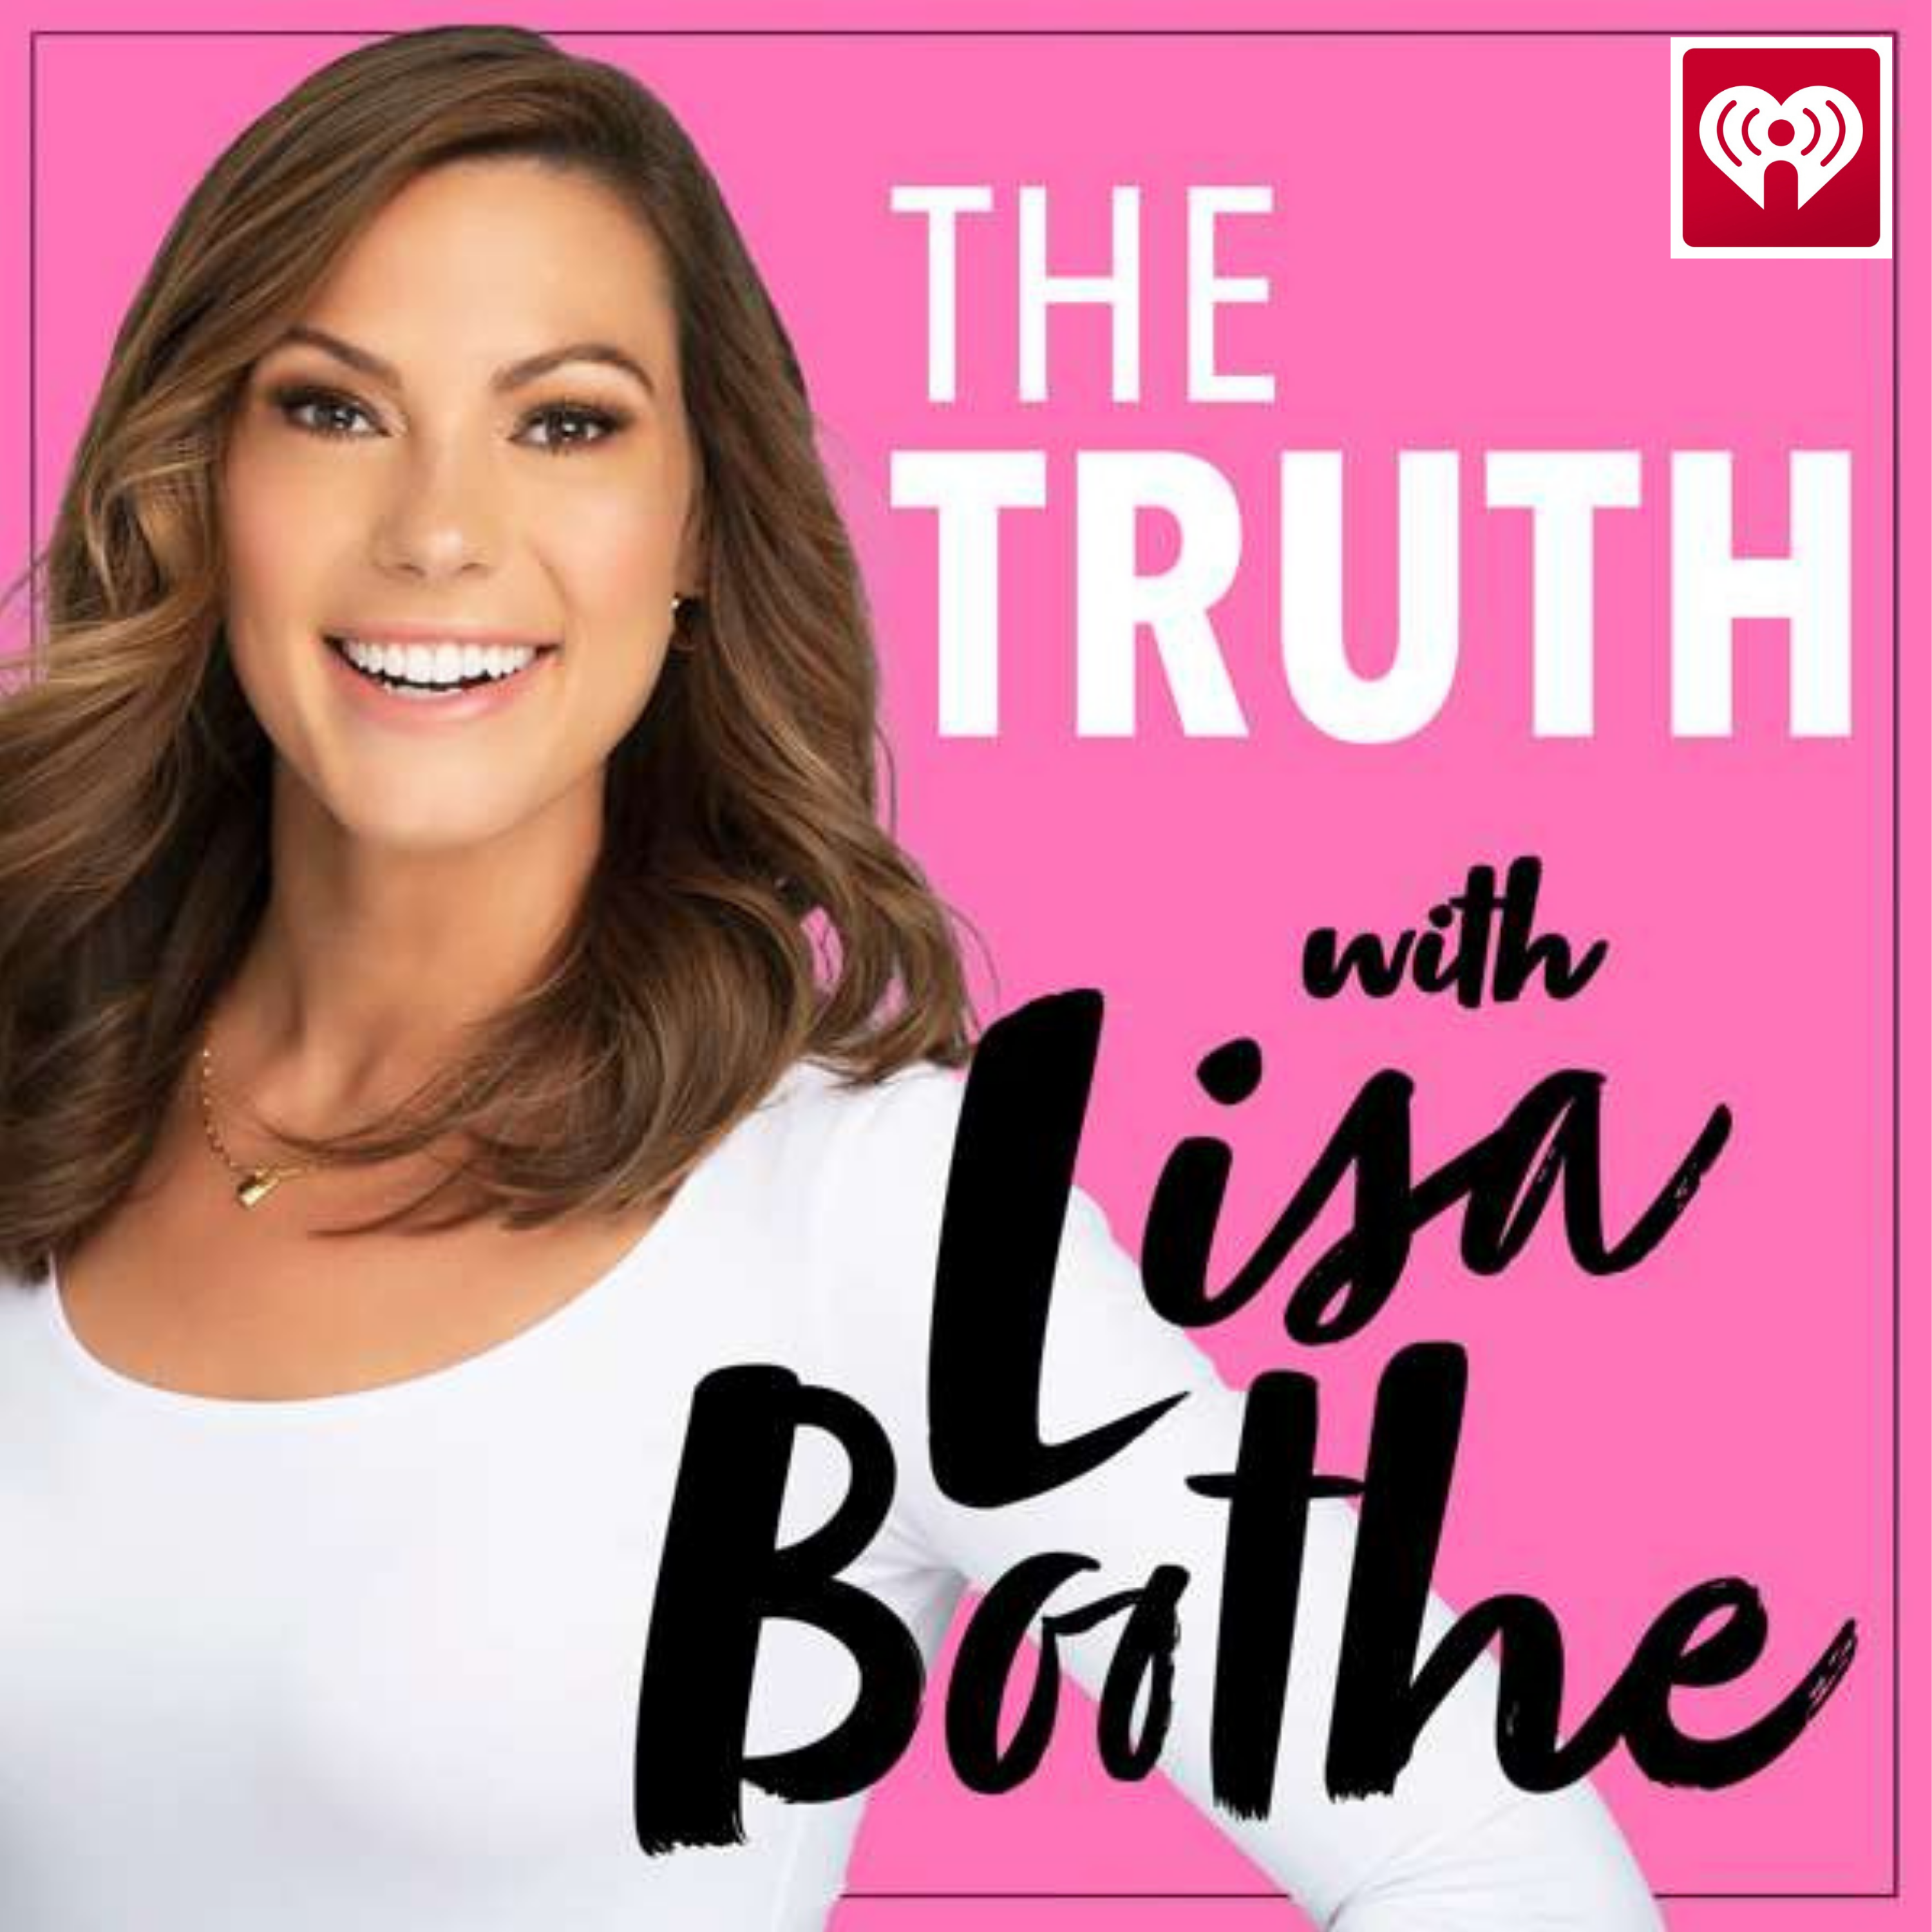 The Truth with Lisa Boothe: Getting to Know Pennsylvania’s Dave McCormick